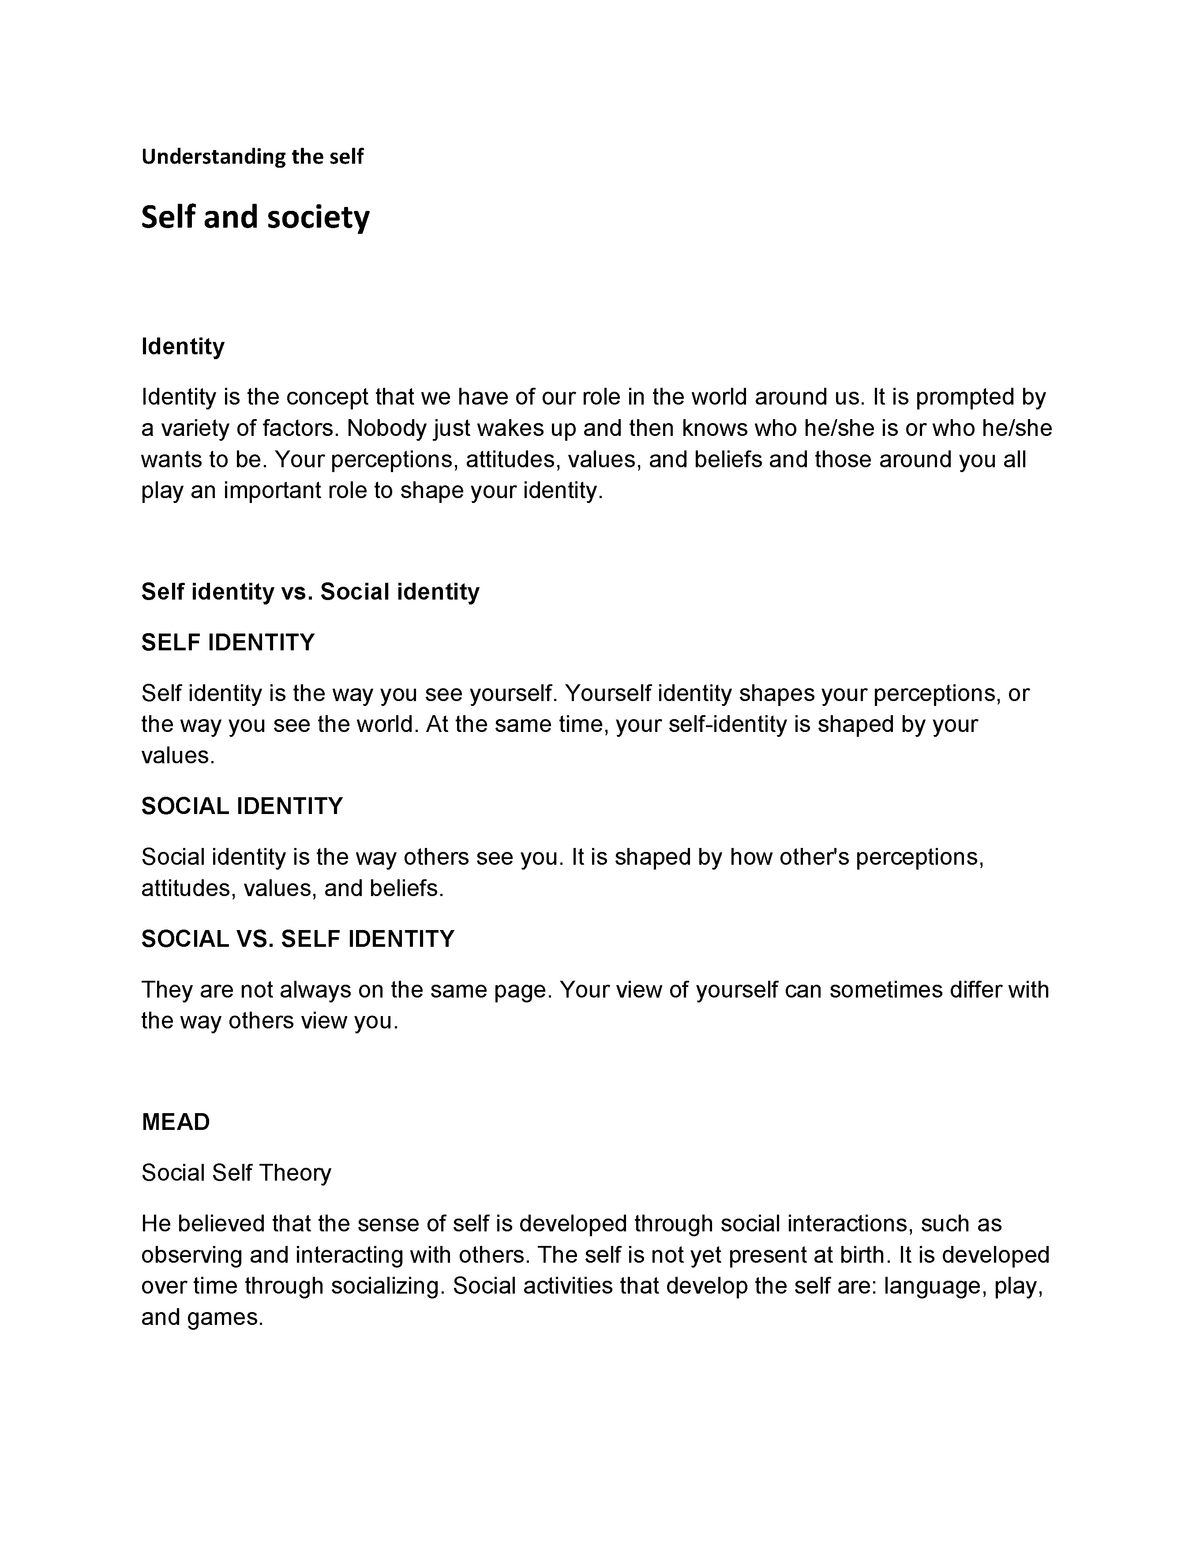 understanding the self and society reflection essay